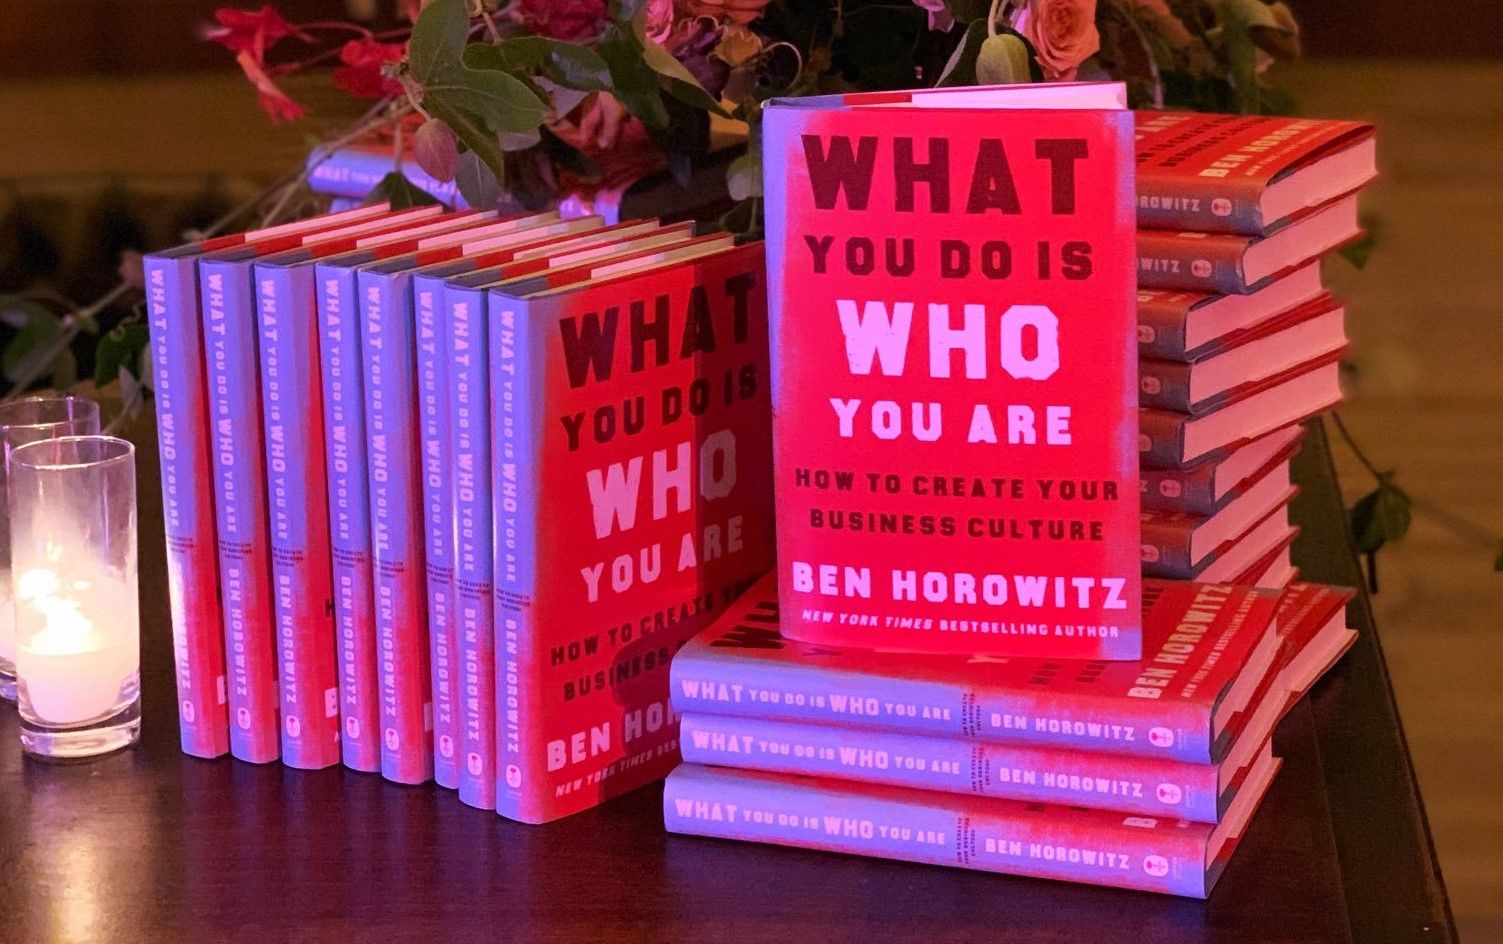 Cheatsheet: "What You Do is Who You Are" by Ben Horowitz